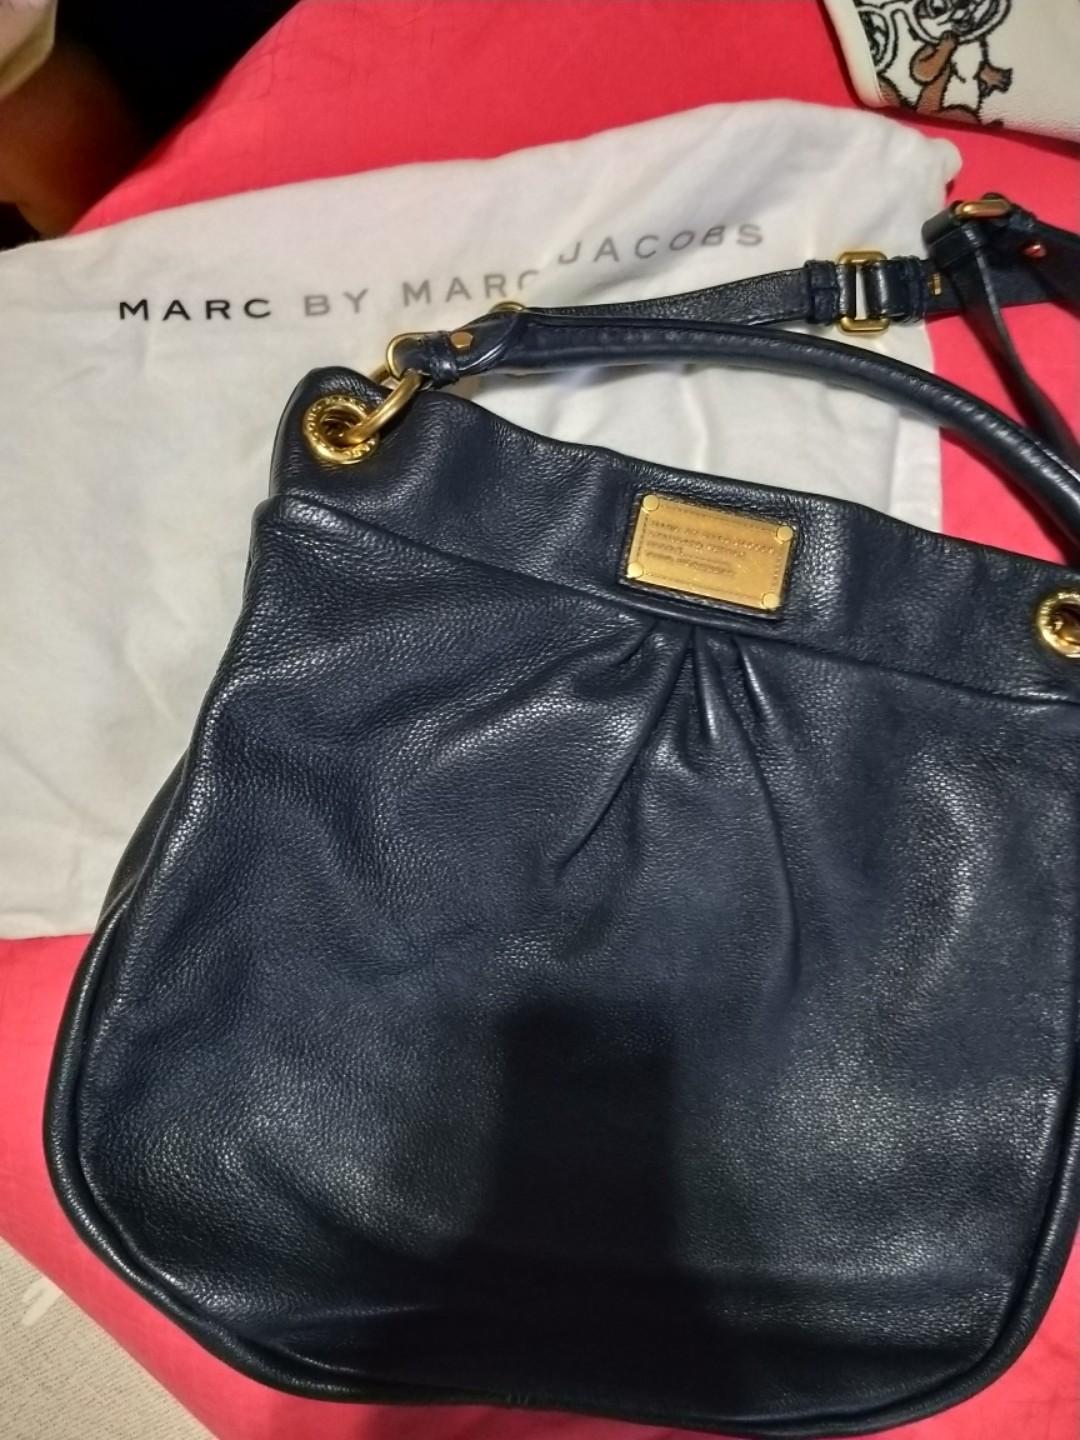 marc by marc jacobs handbags